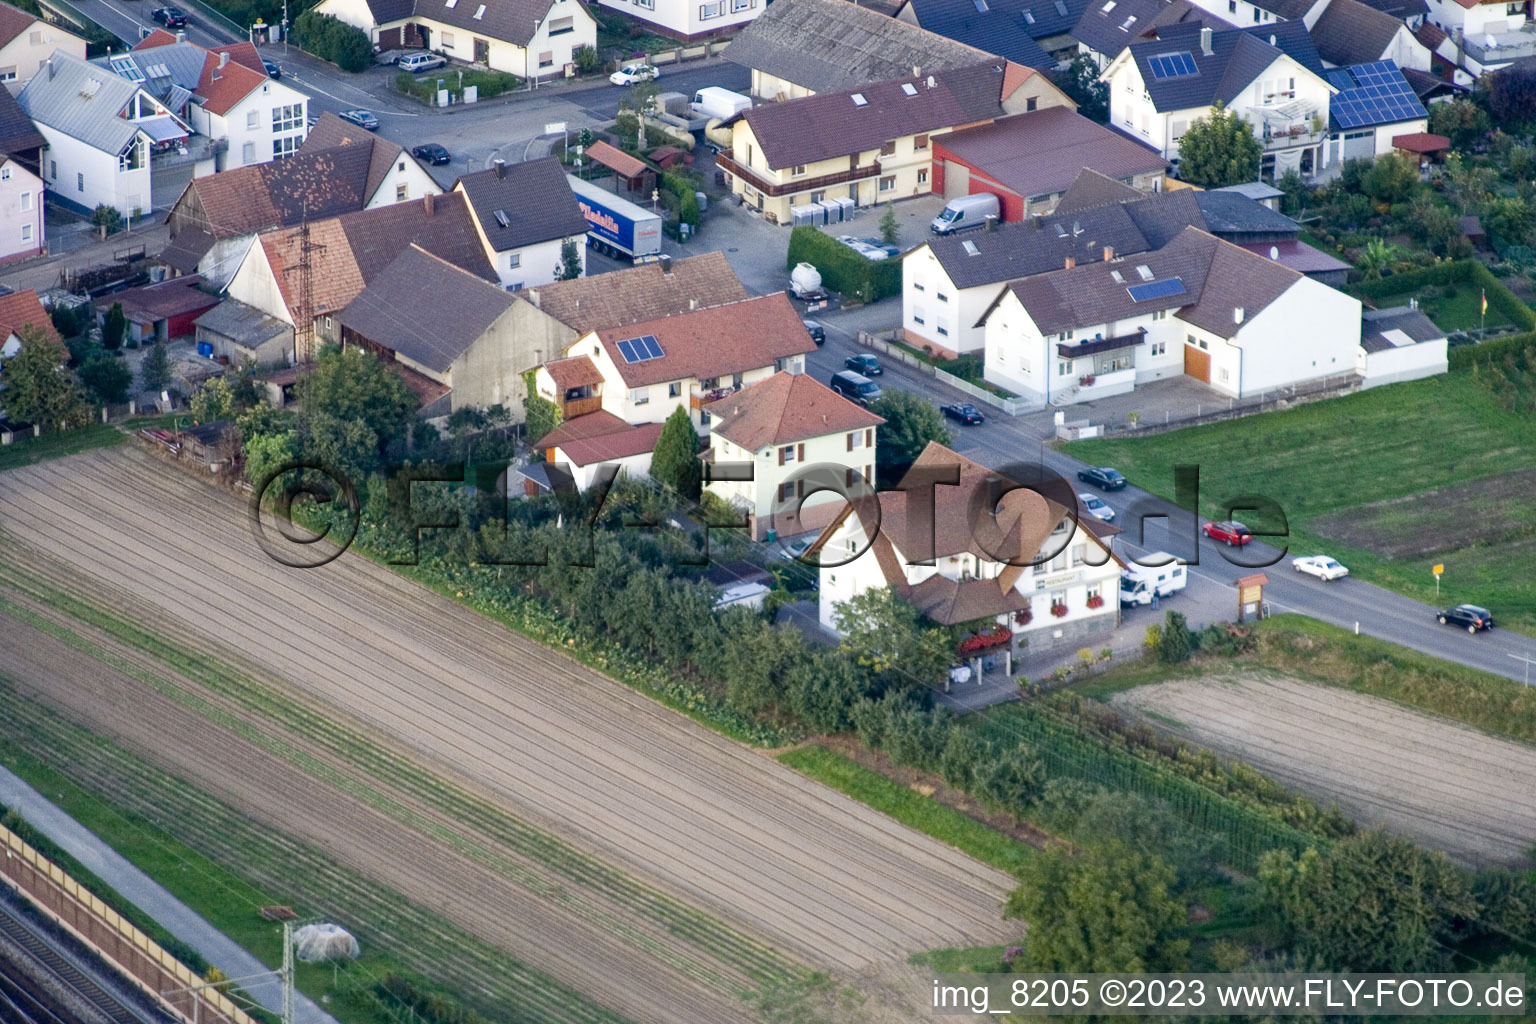 Town View of the streets and houses of the residential areas in the district Zimmern in Appenweier in the state Baden-Wurttemberg